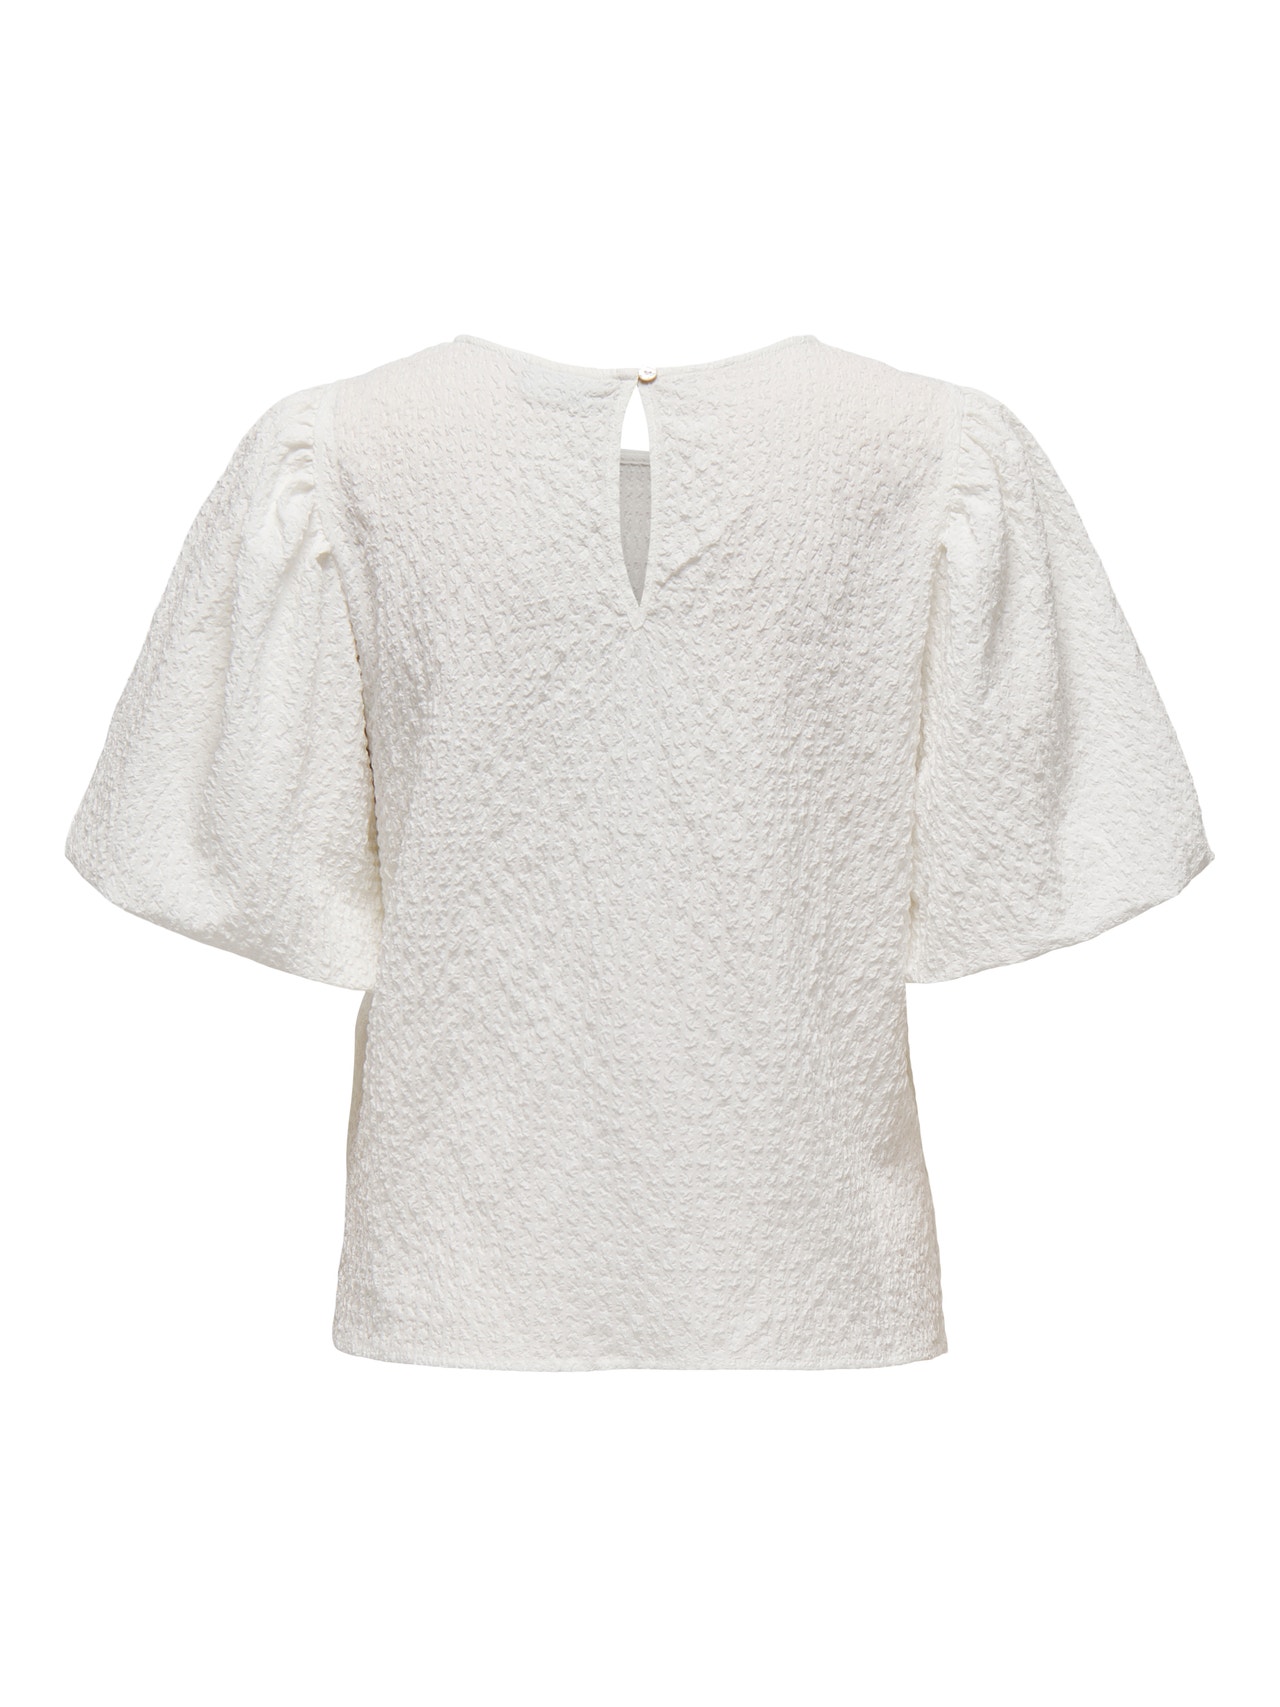 ONLY O-neck top with balloon sleeves -Cloud Dancer - 15310740